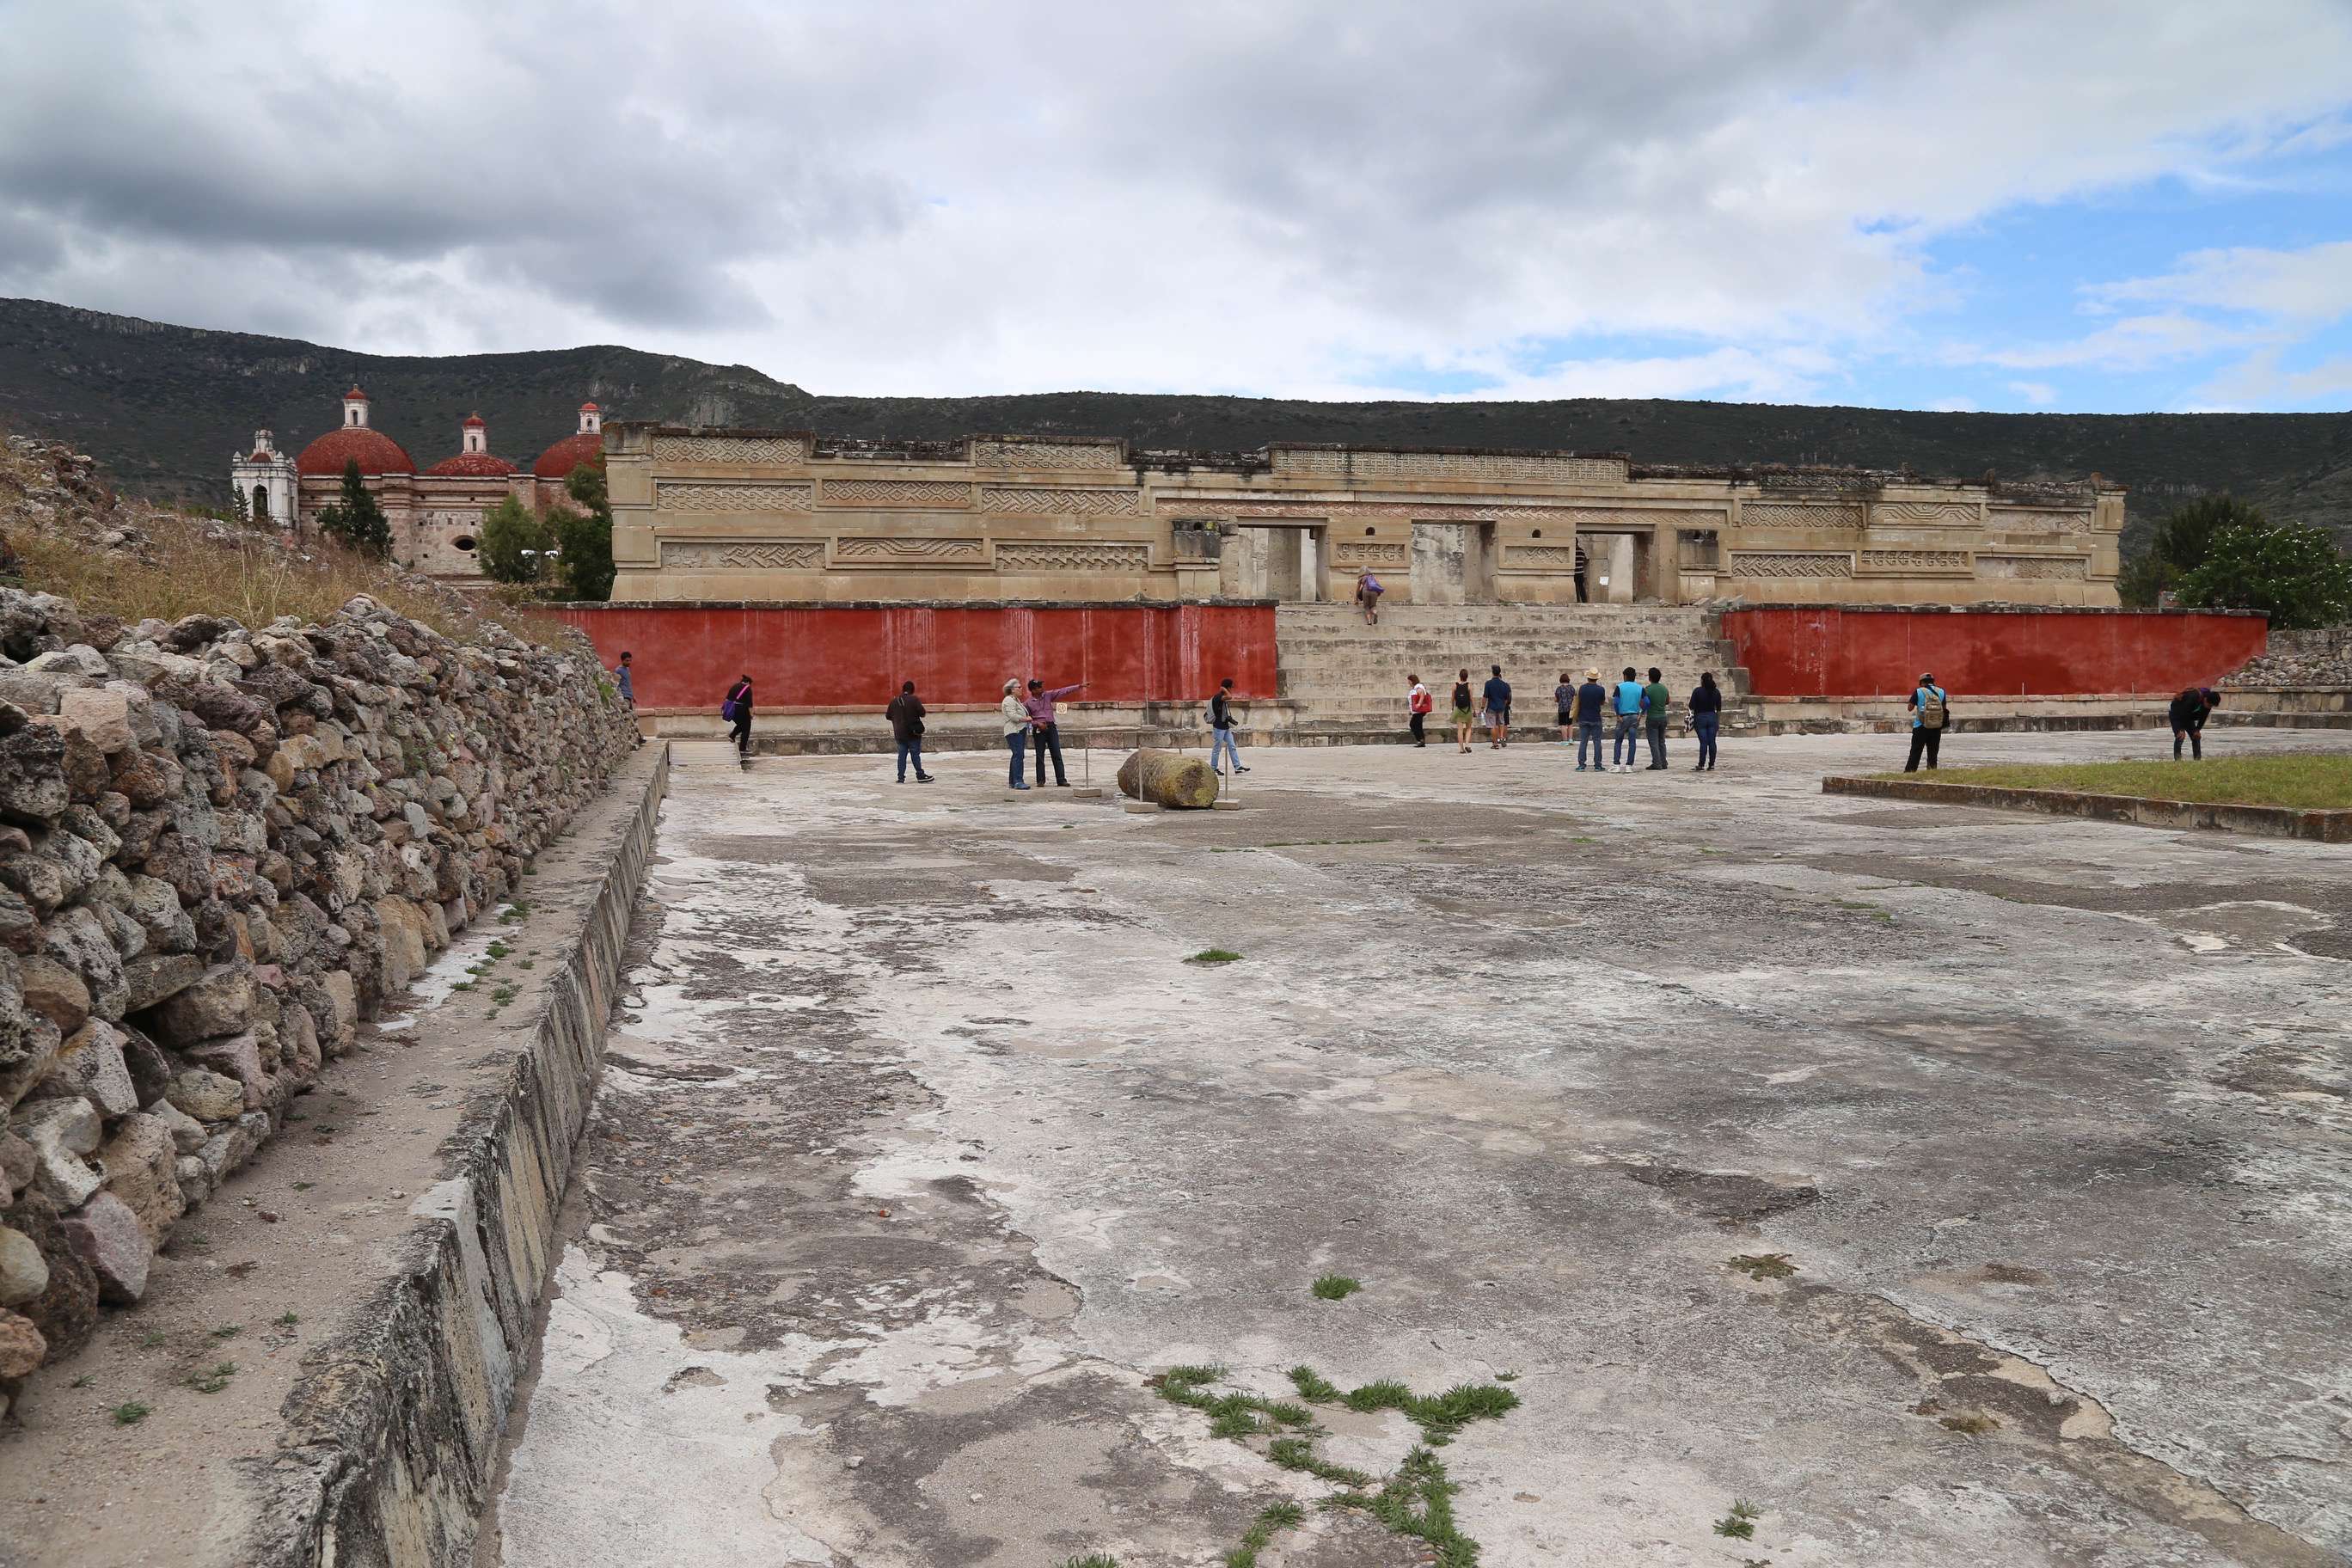 With the Spanish colonial church in the background, left, visitors roam the main courtyard as they take in Mitla.